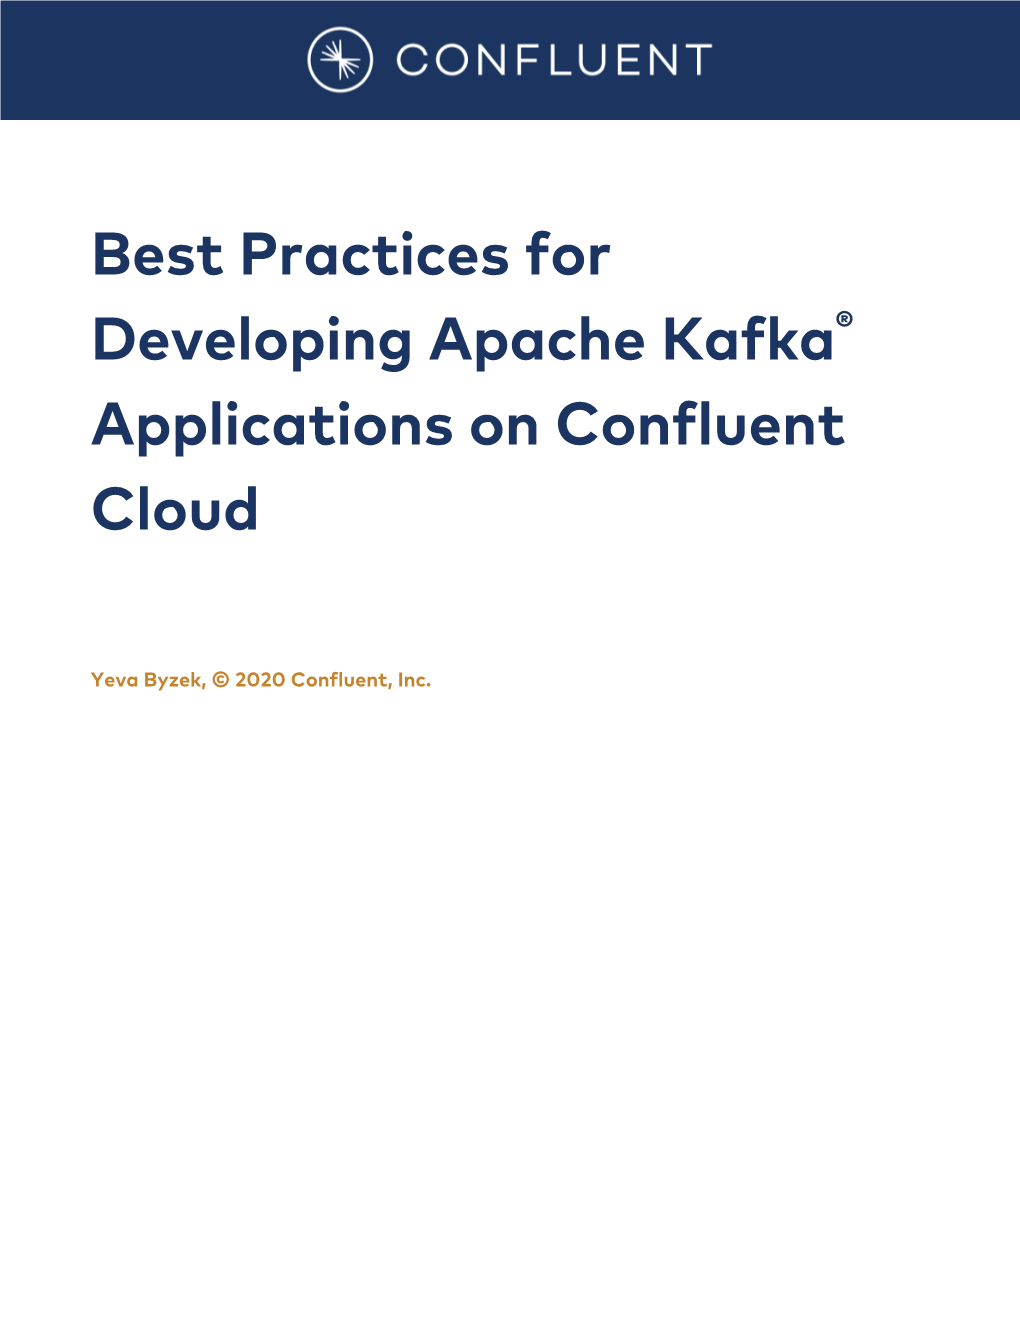 Best Practices for Developing Apache Kafka® Applications on Confluent Cloud